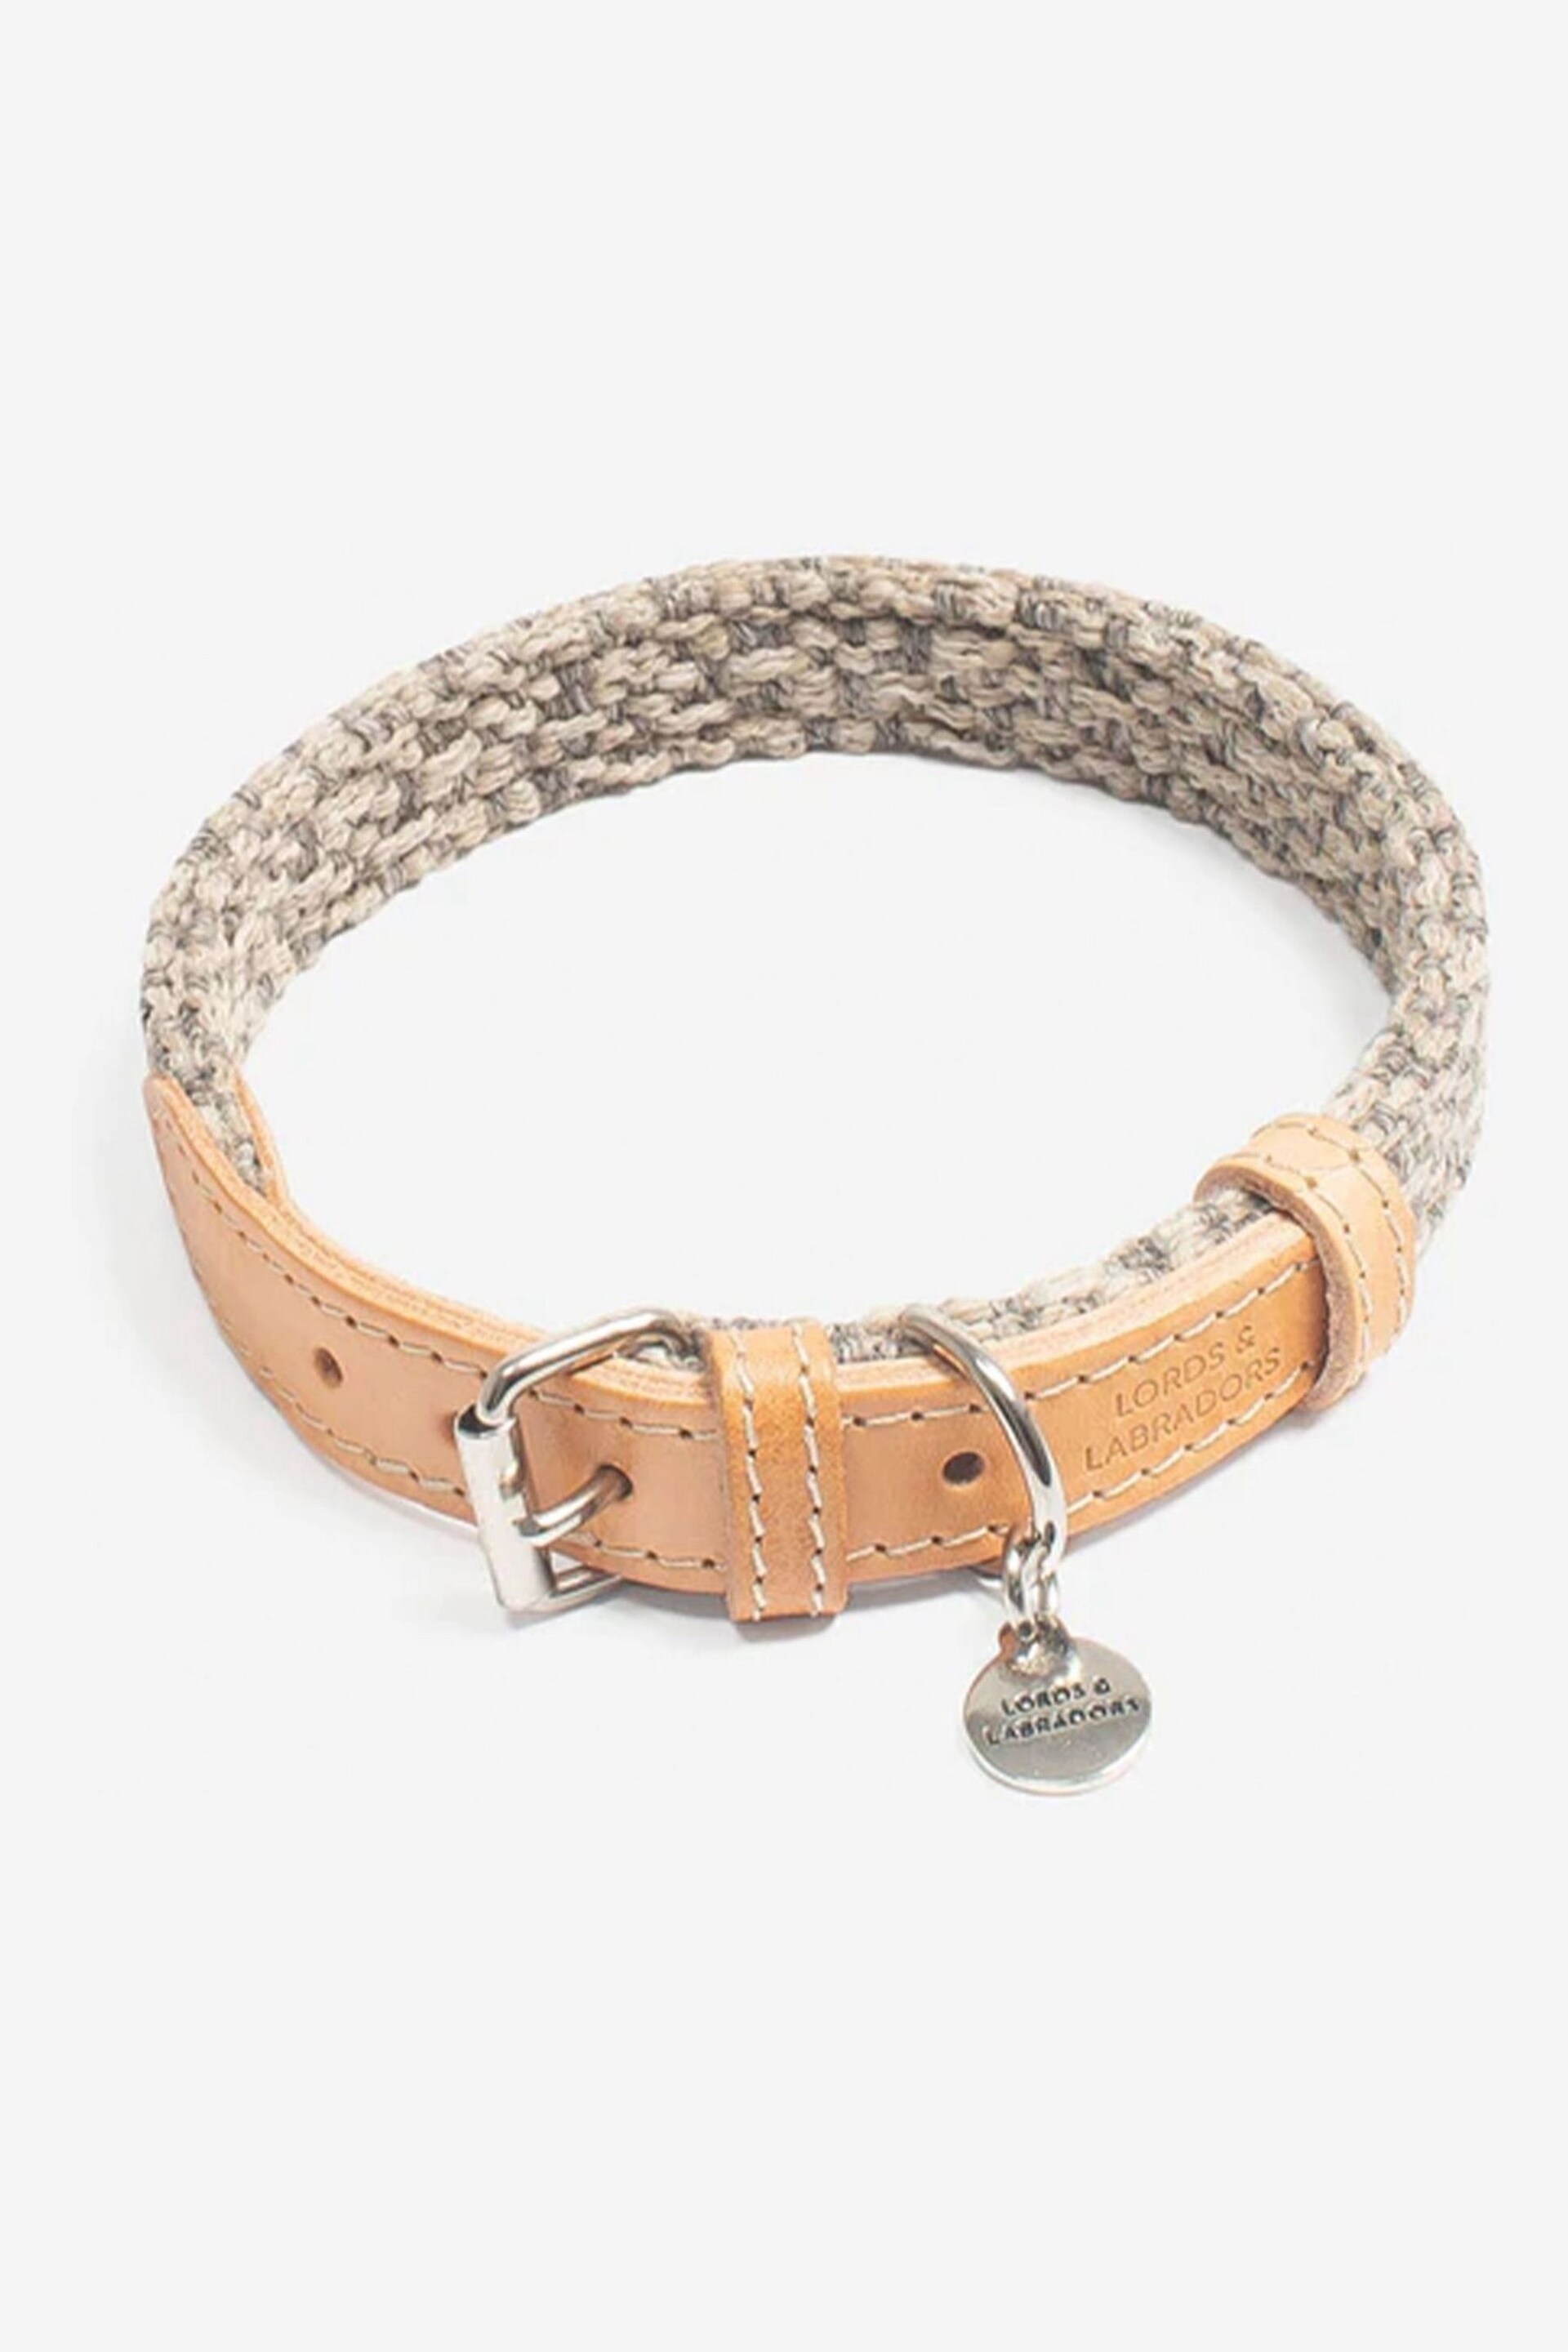 Lords and Labradors Pebble Essentials Herdwick Dog Collar - Image 1 of 6